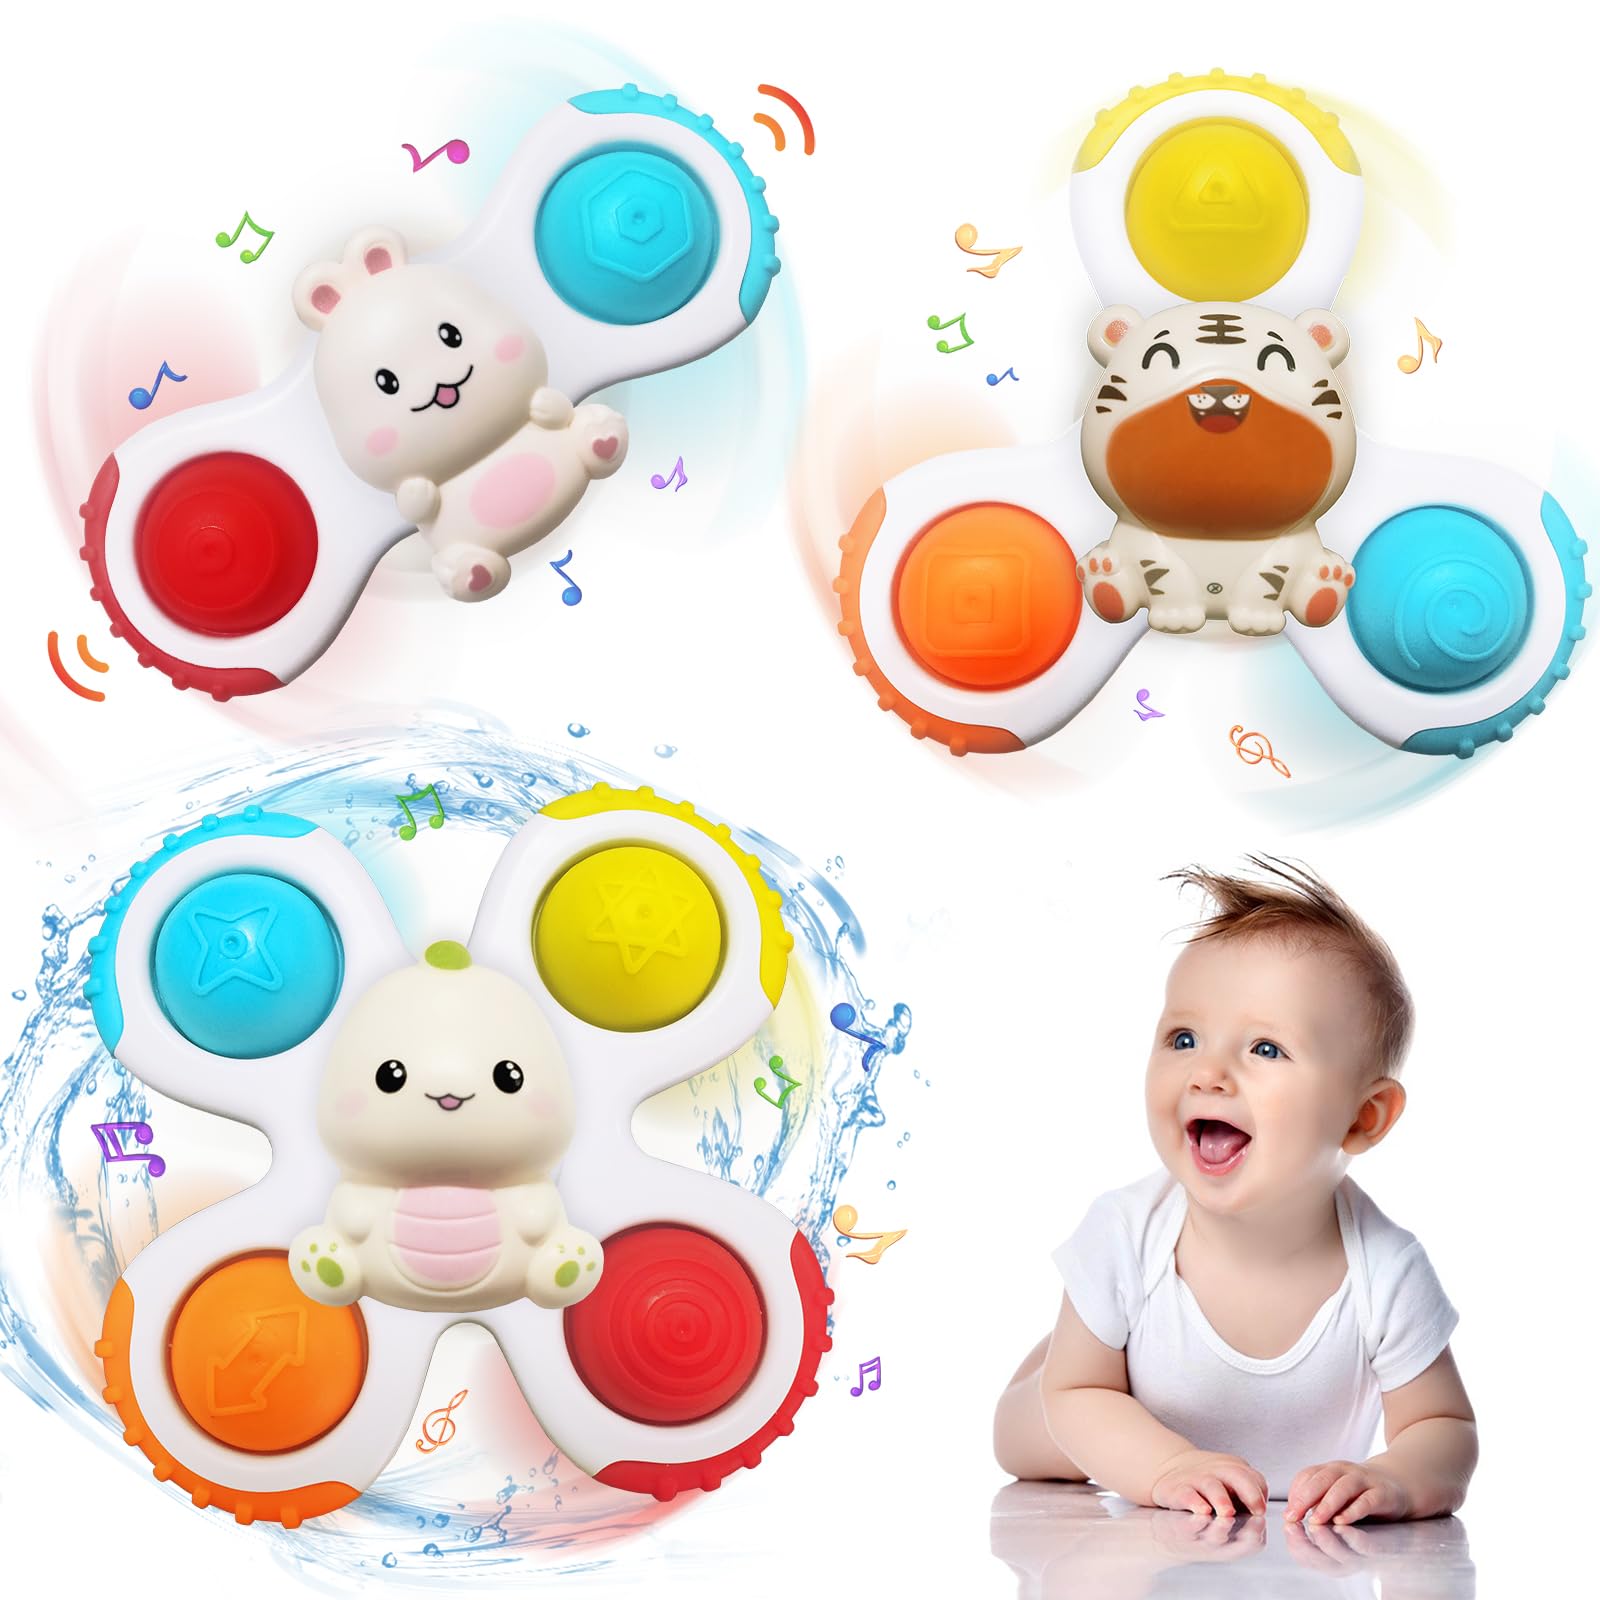 3PCS Suction Cup Spinner Toy for Baby, Bath Toys for Toddlers 1-3, Baby Spinners with Suction Cups, Window Travel Suction Cup Toys, Baby Toys for 1 Year Old, Sensory Bath Toys Gifts for Boys Girls